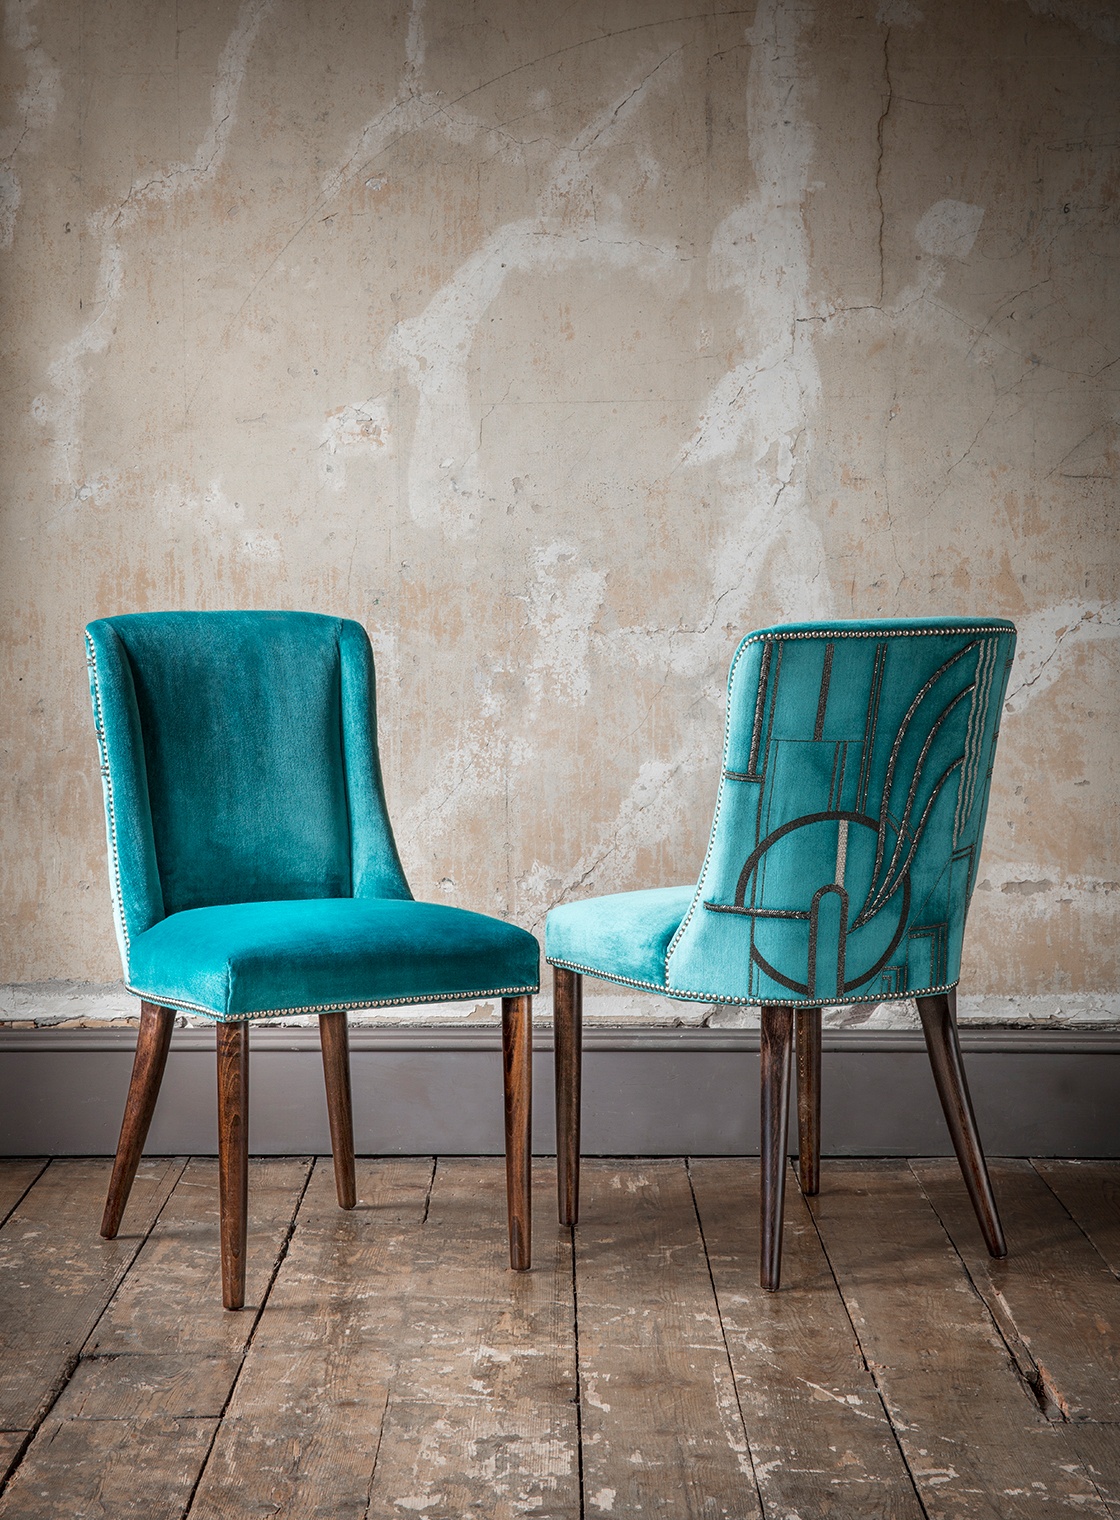 Calypso side chair in Capri-Aquamarine and Wallis embroidery - Beaumont & Fletcher